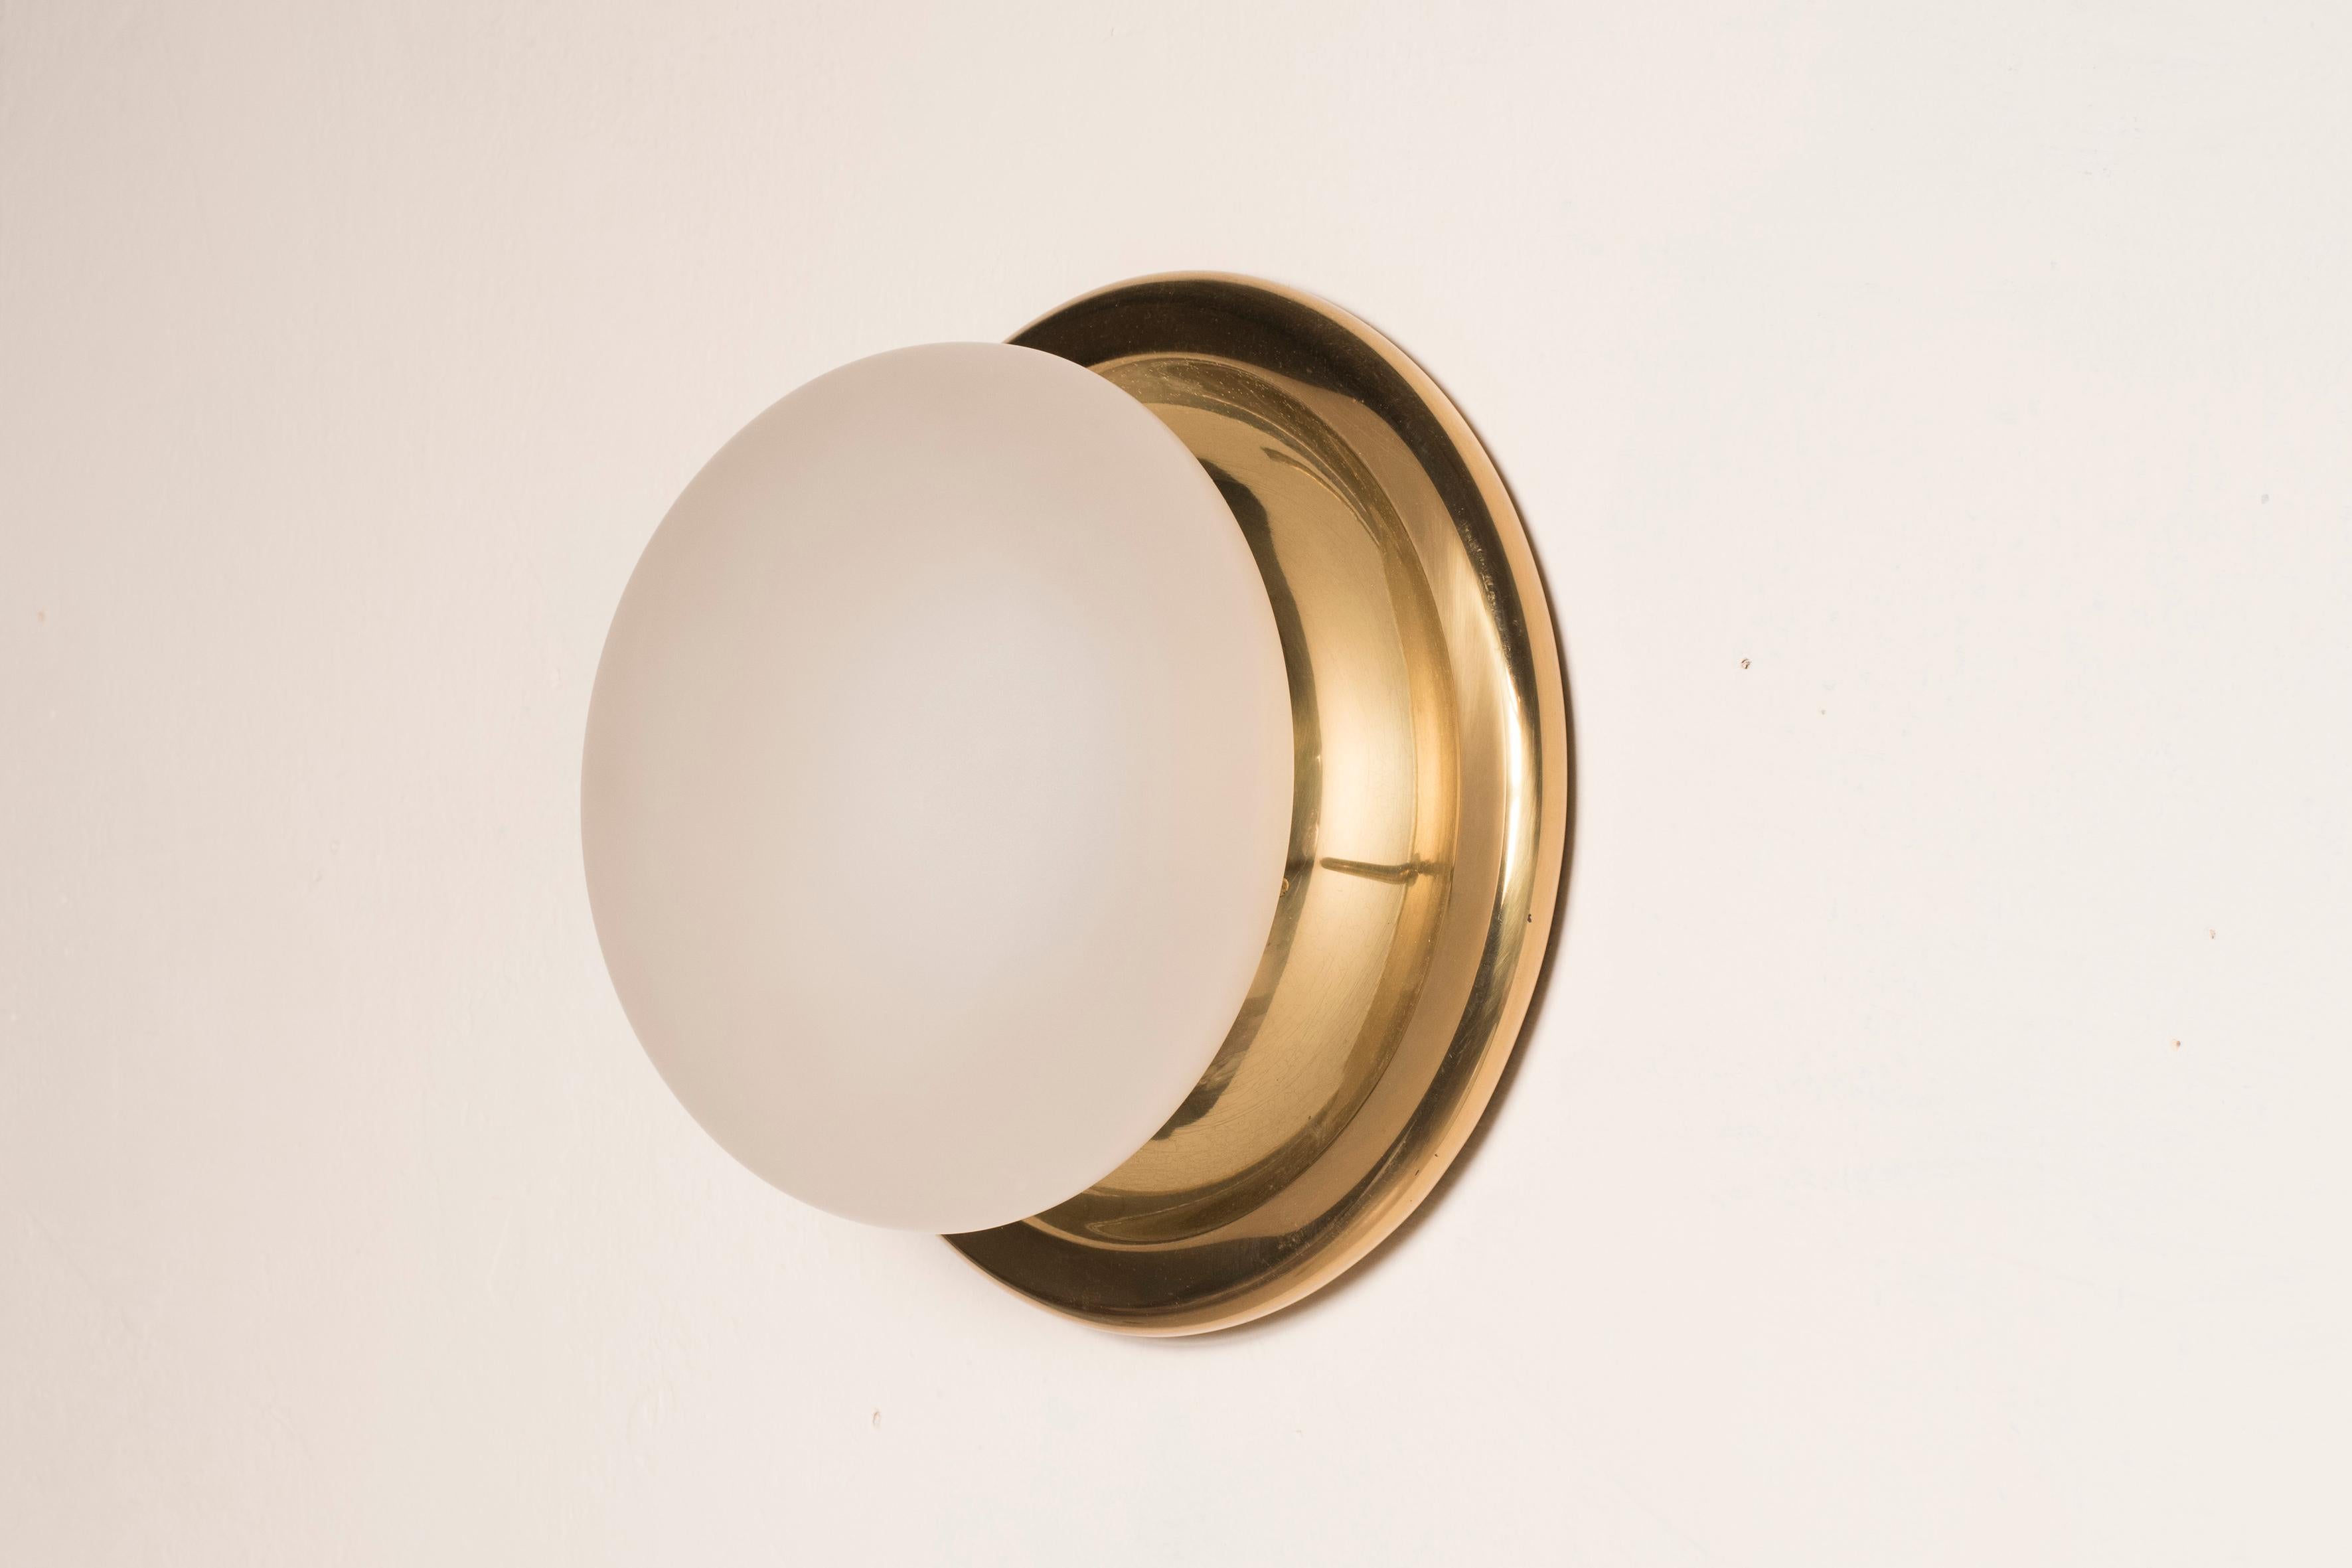 1970s white frosted glass wall lights with brass base 
8 available, price per item
Size: diameter 27 cm 
Rewired, ready to be hanged
The wall sconces come in excellent conditions no cracks in the glass, the brass comes in its original patina